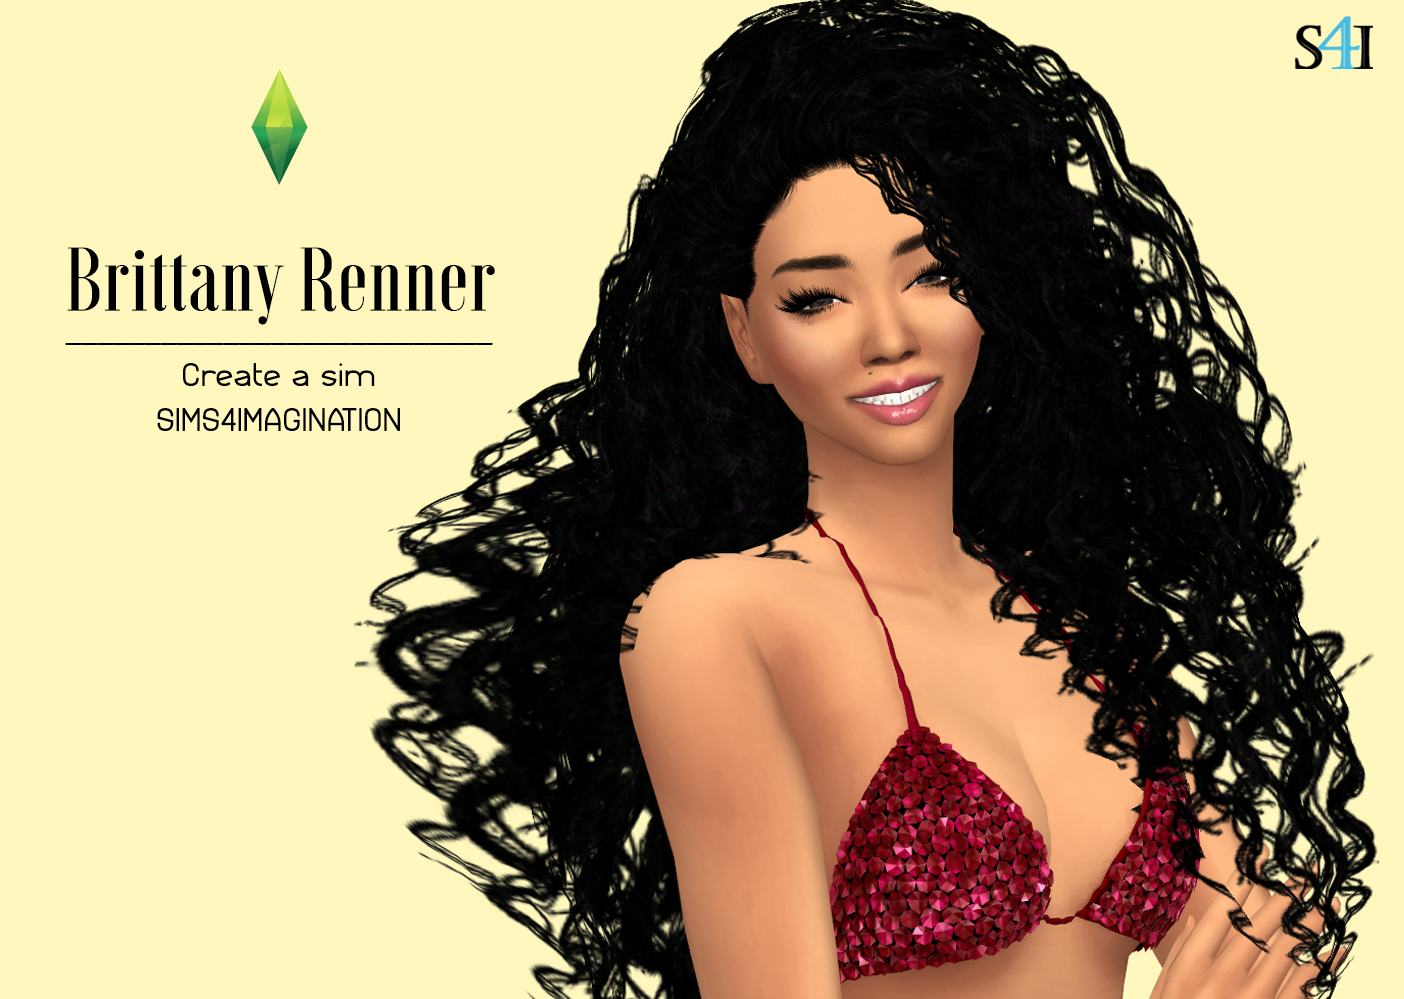 My Sims 4 CAS: Brittany Renner.